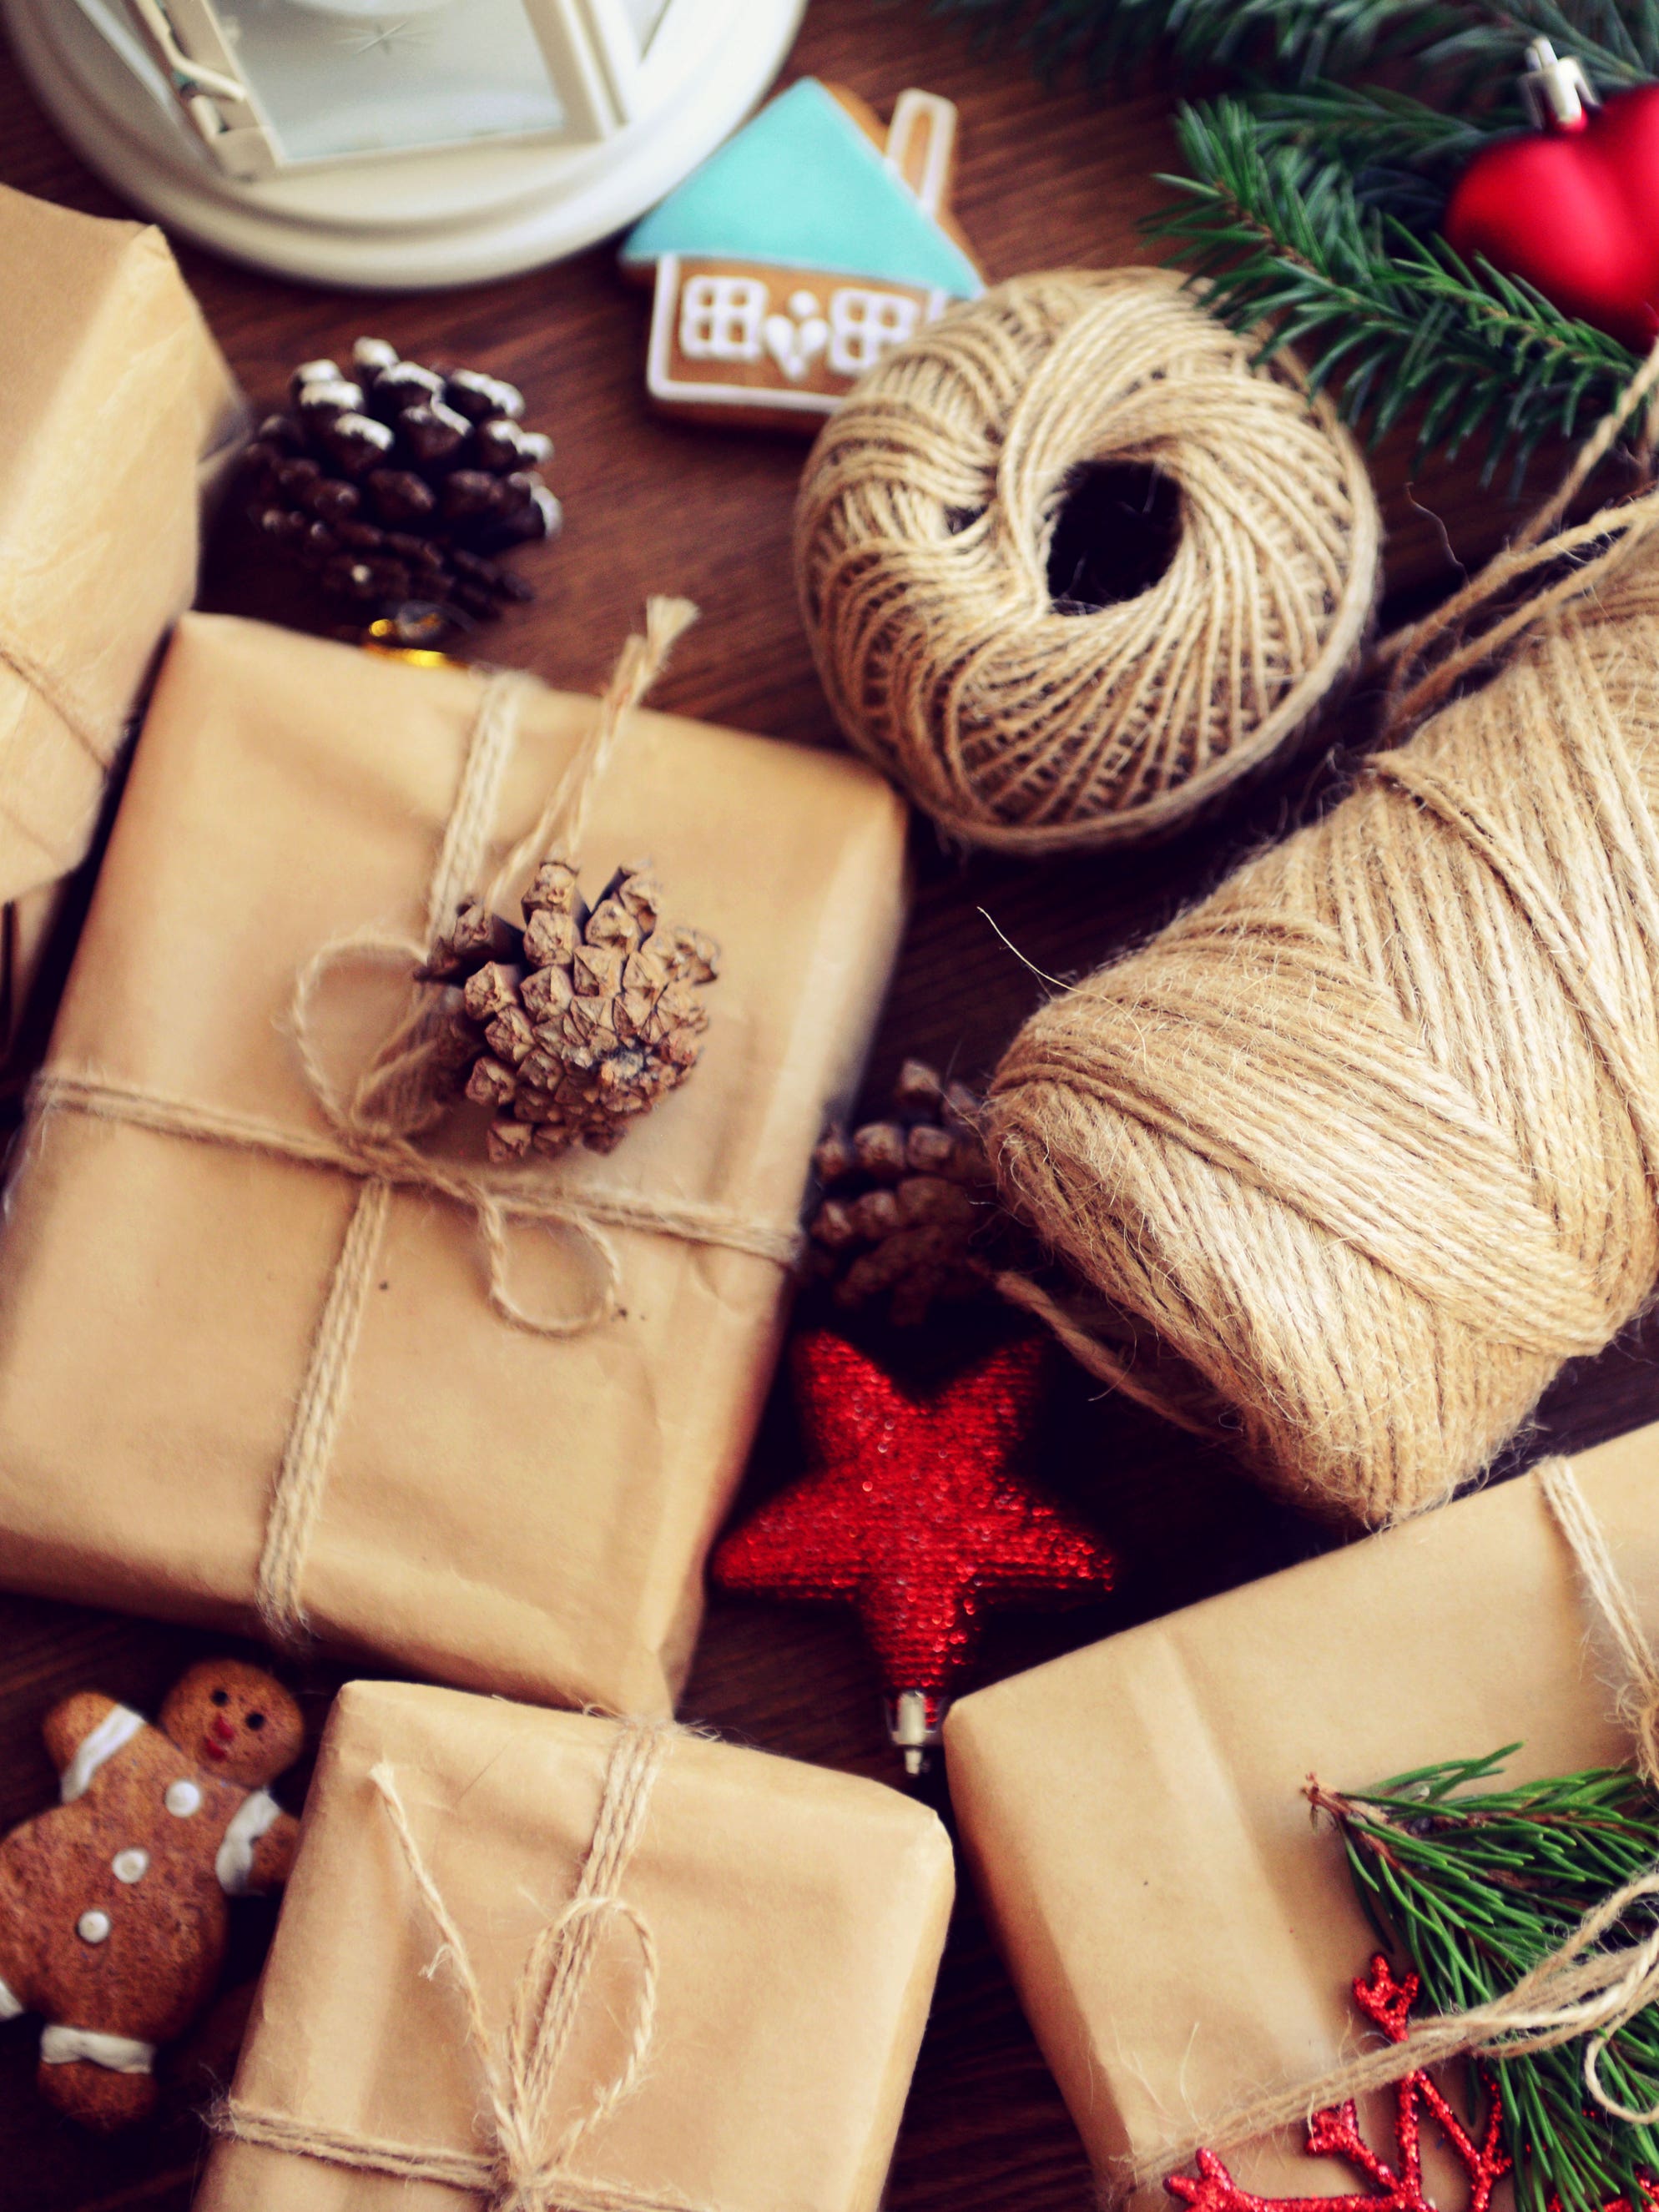 5 Things We Spend Too Much Money on Over the Holidays (and How to Save)